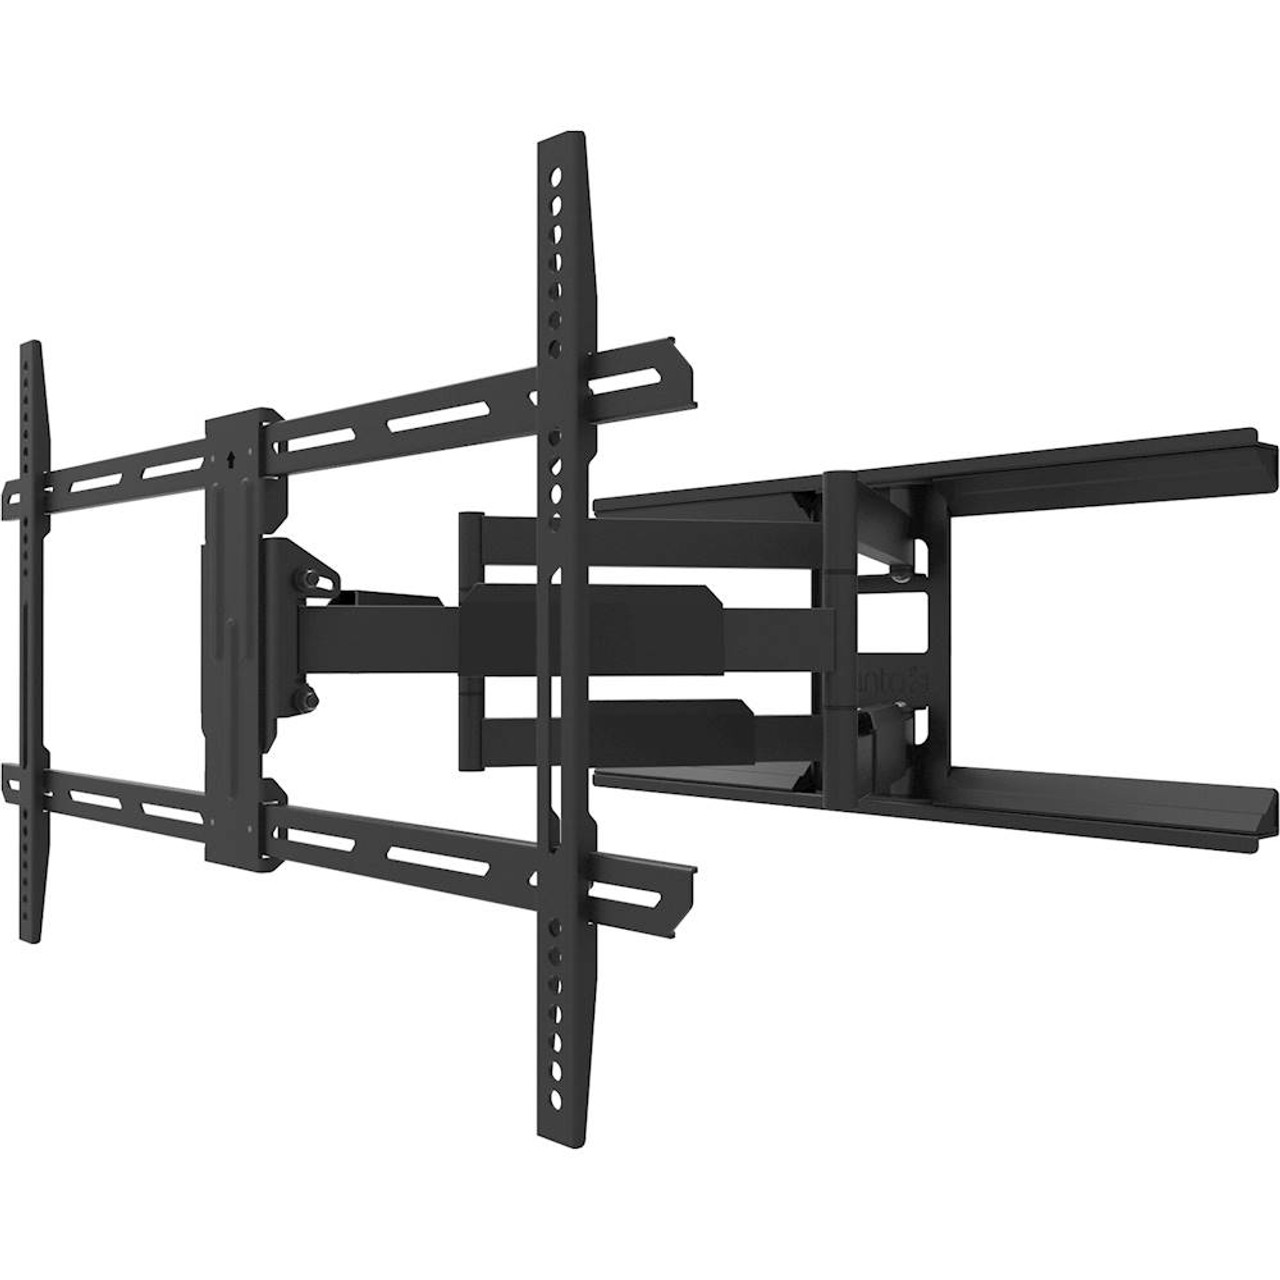 Kanto - Full-Motion TV Wall Mount for Most 40" - 90" TVs - Extends 28" - Black